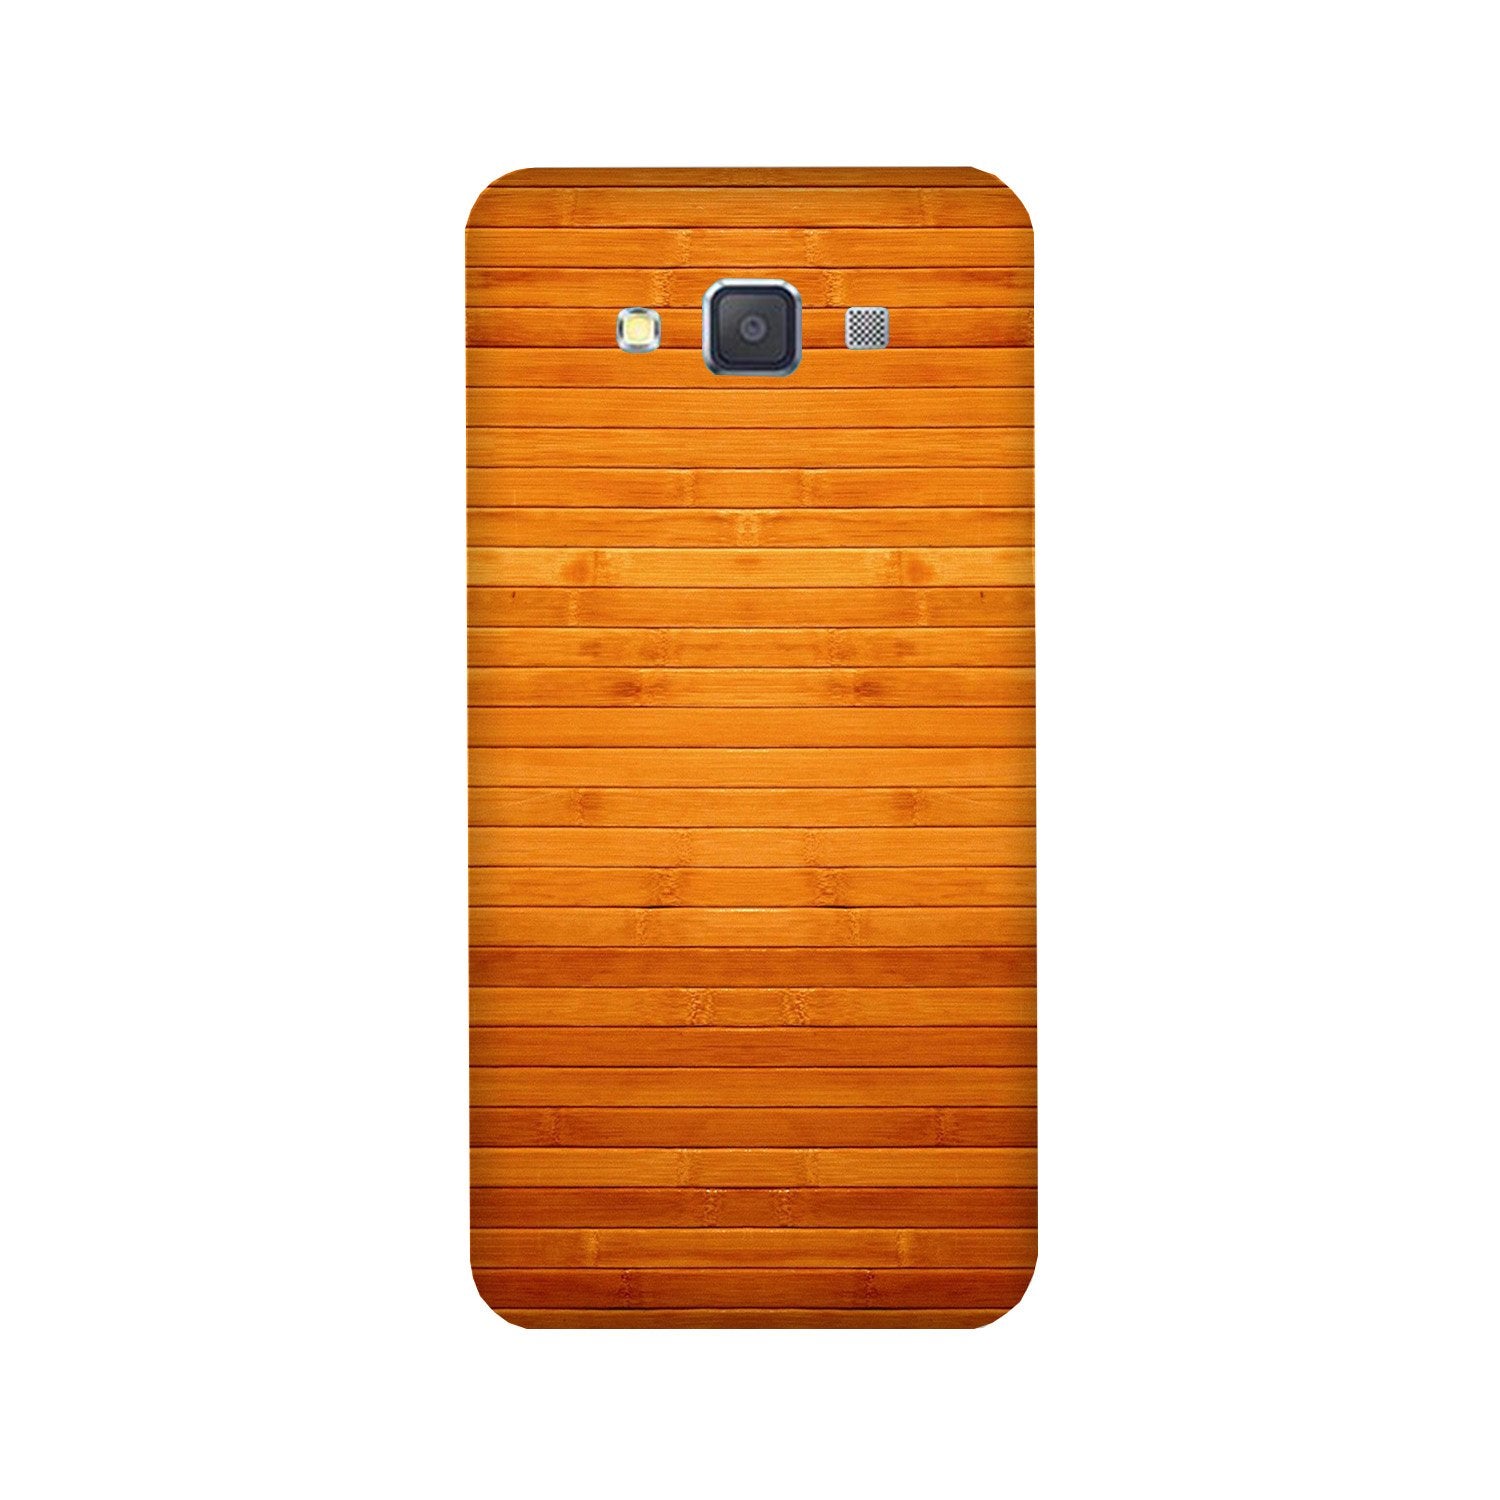 Wooden Look Case for Galaxy Grand Prime(Design - 111)